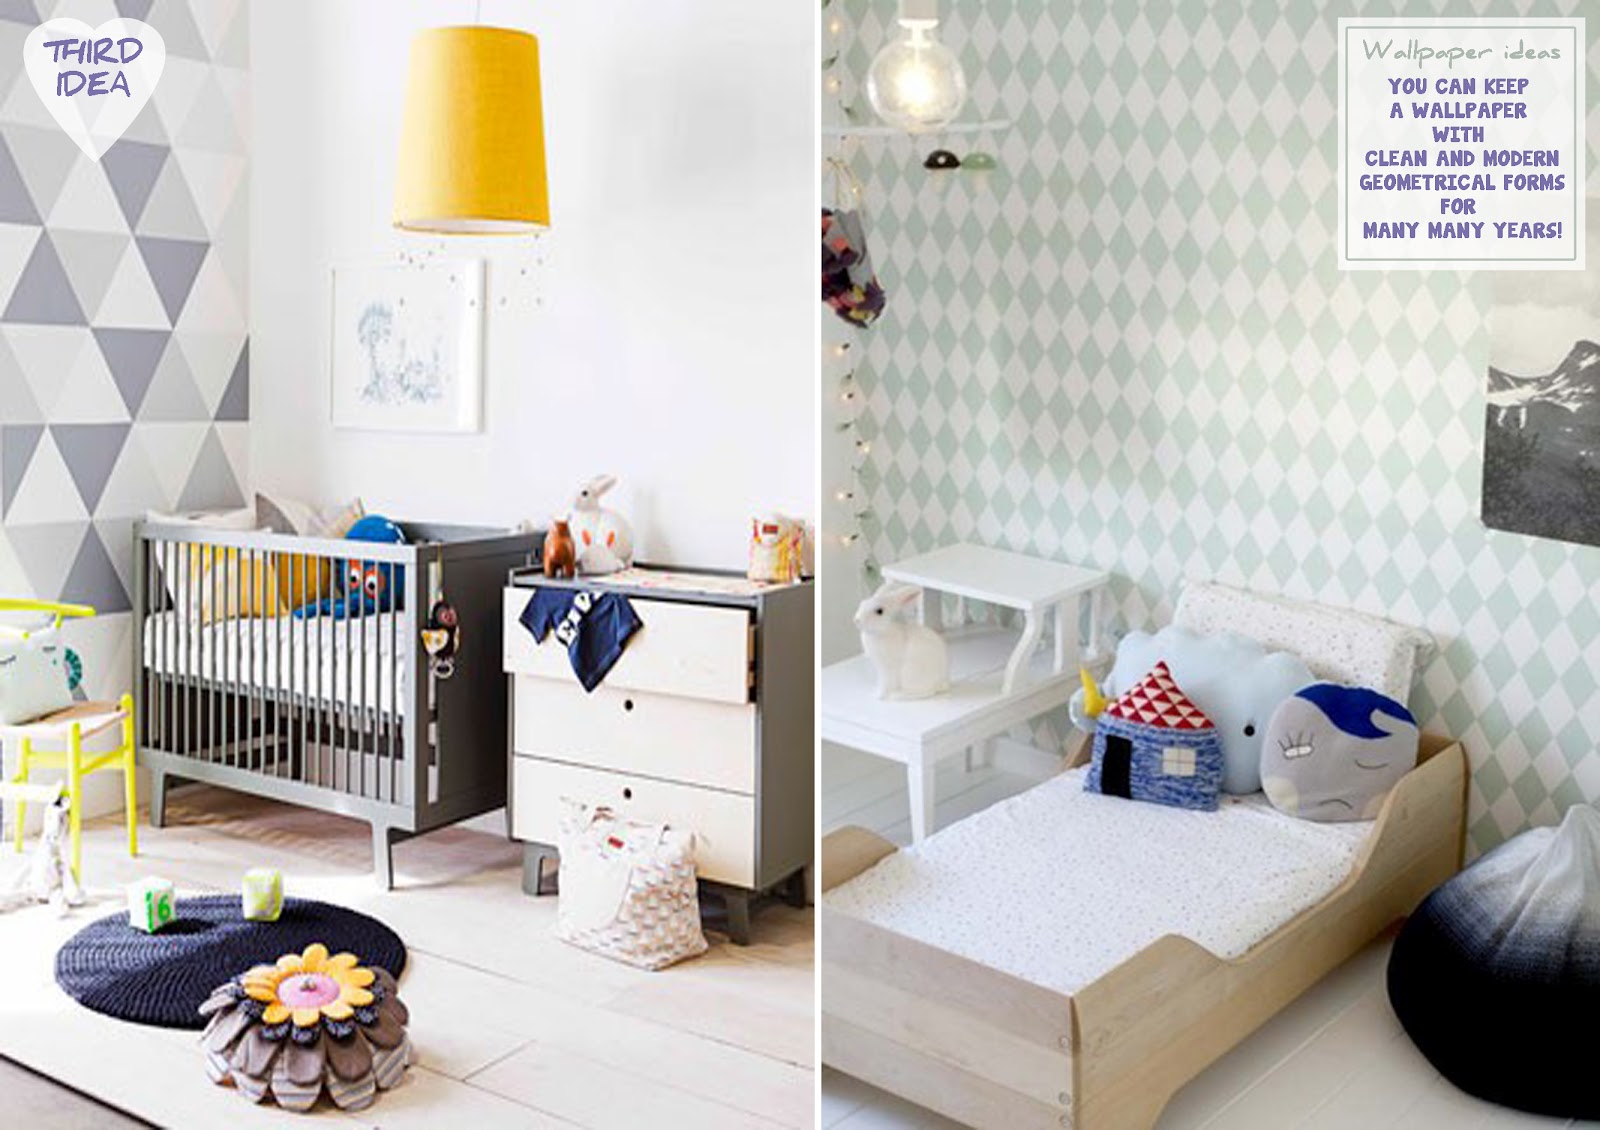 Modern Baby Room Wallpaper Only One Wall Of The